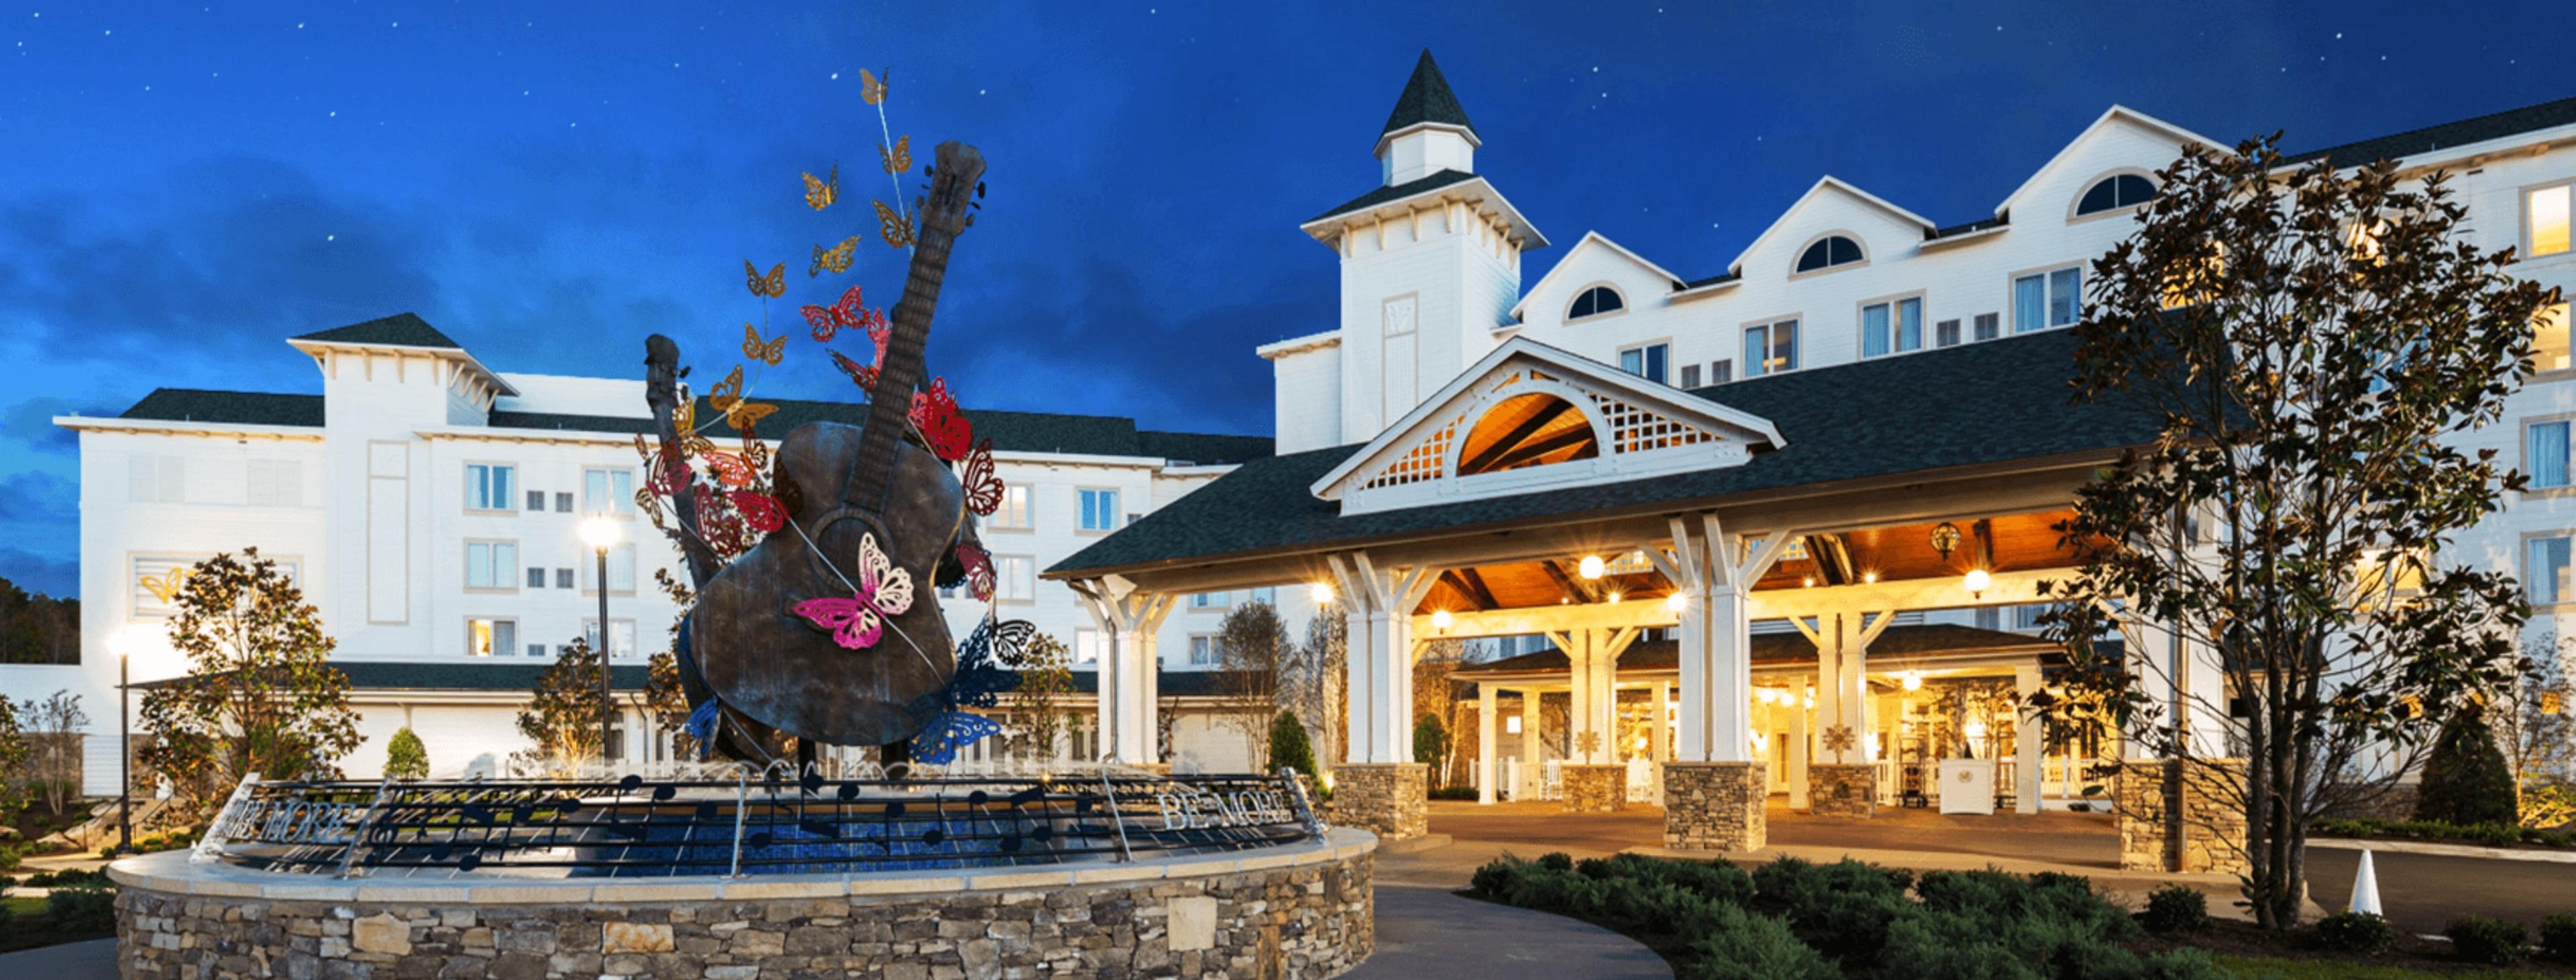 Dollywood's DreamMore Resort & Spa